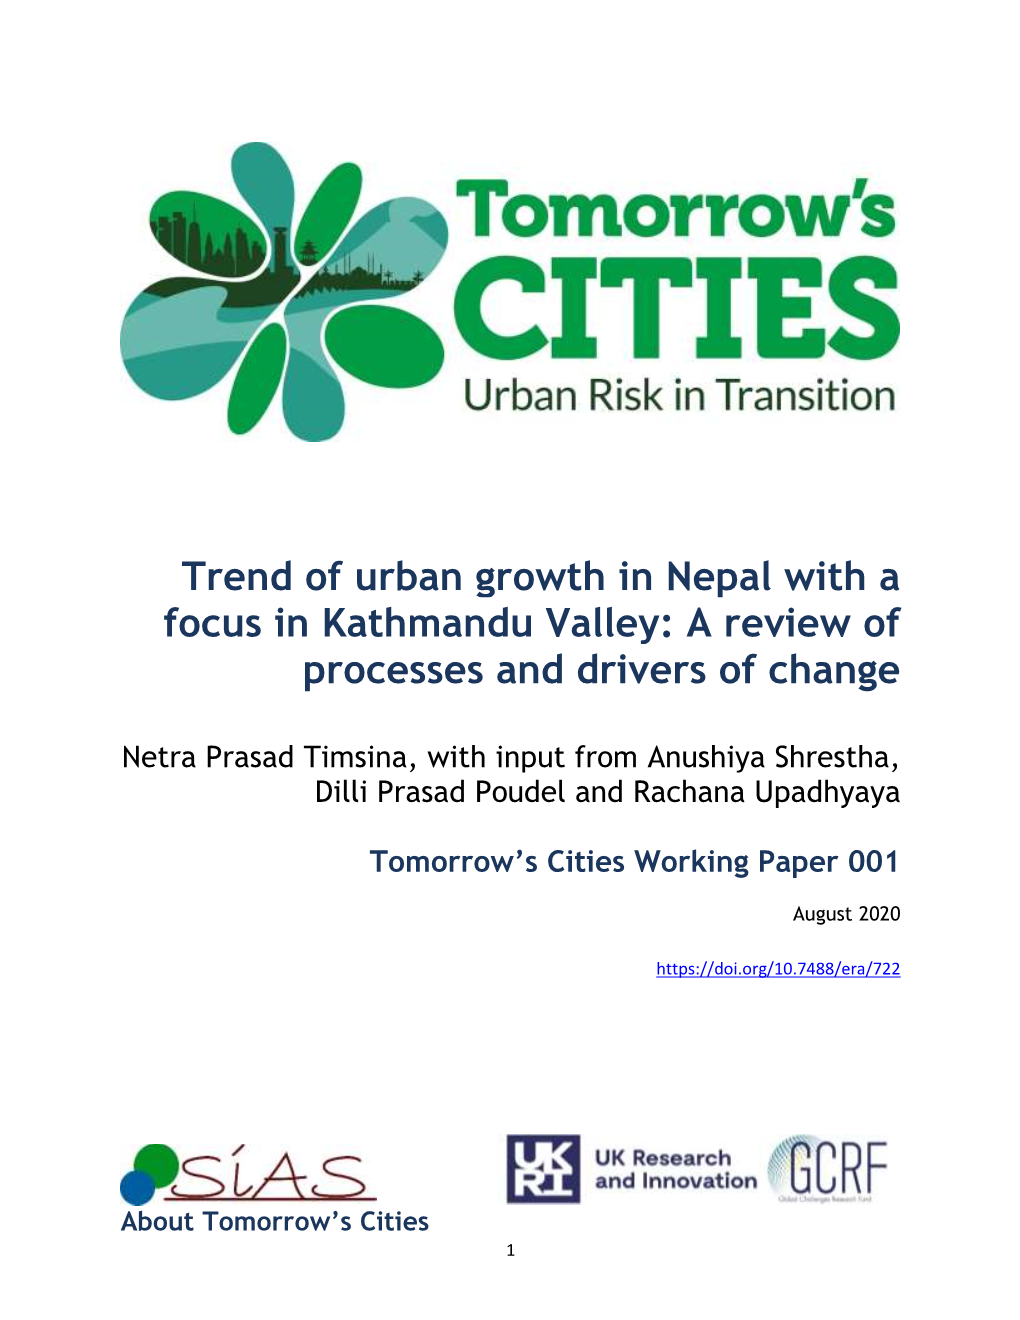 Trend of Urban Growth in Nepal with a Focus in Kathmandu Valley: a Review of Processes and Drivers of Change